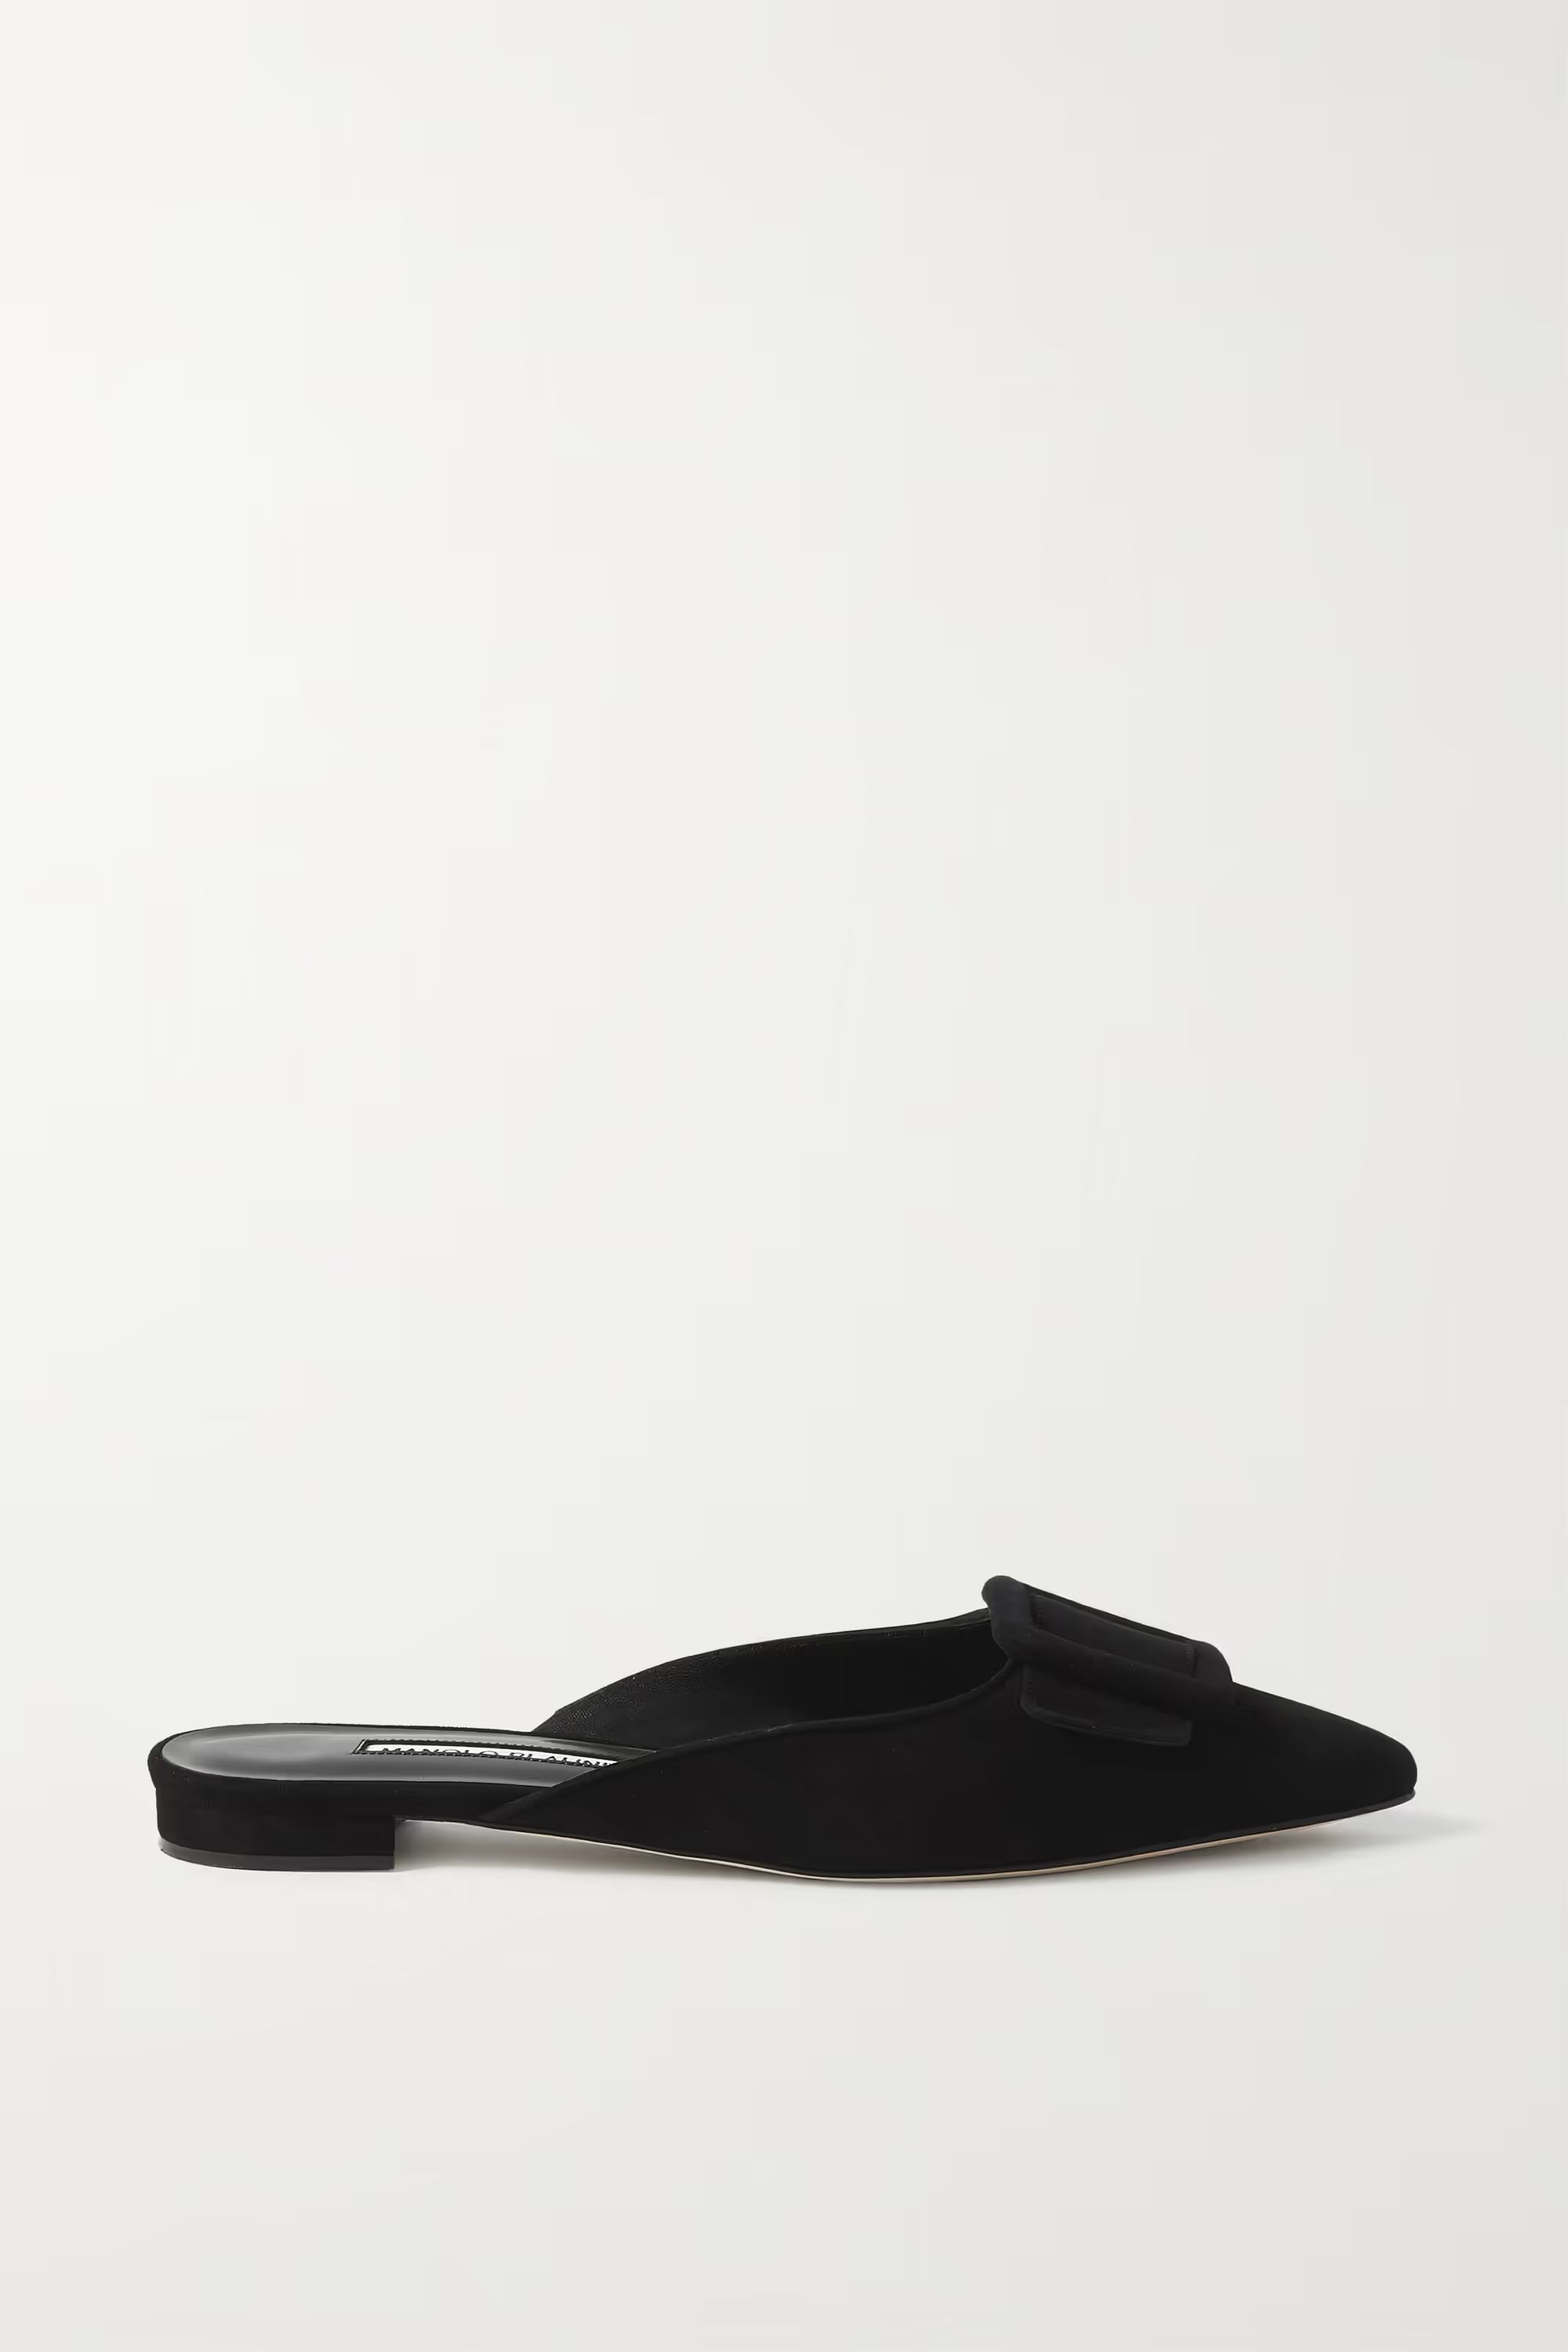 Maysale buckled suede point-toe flats | NET-A-PORTER (US)